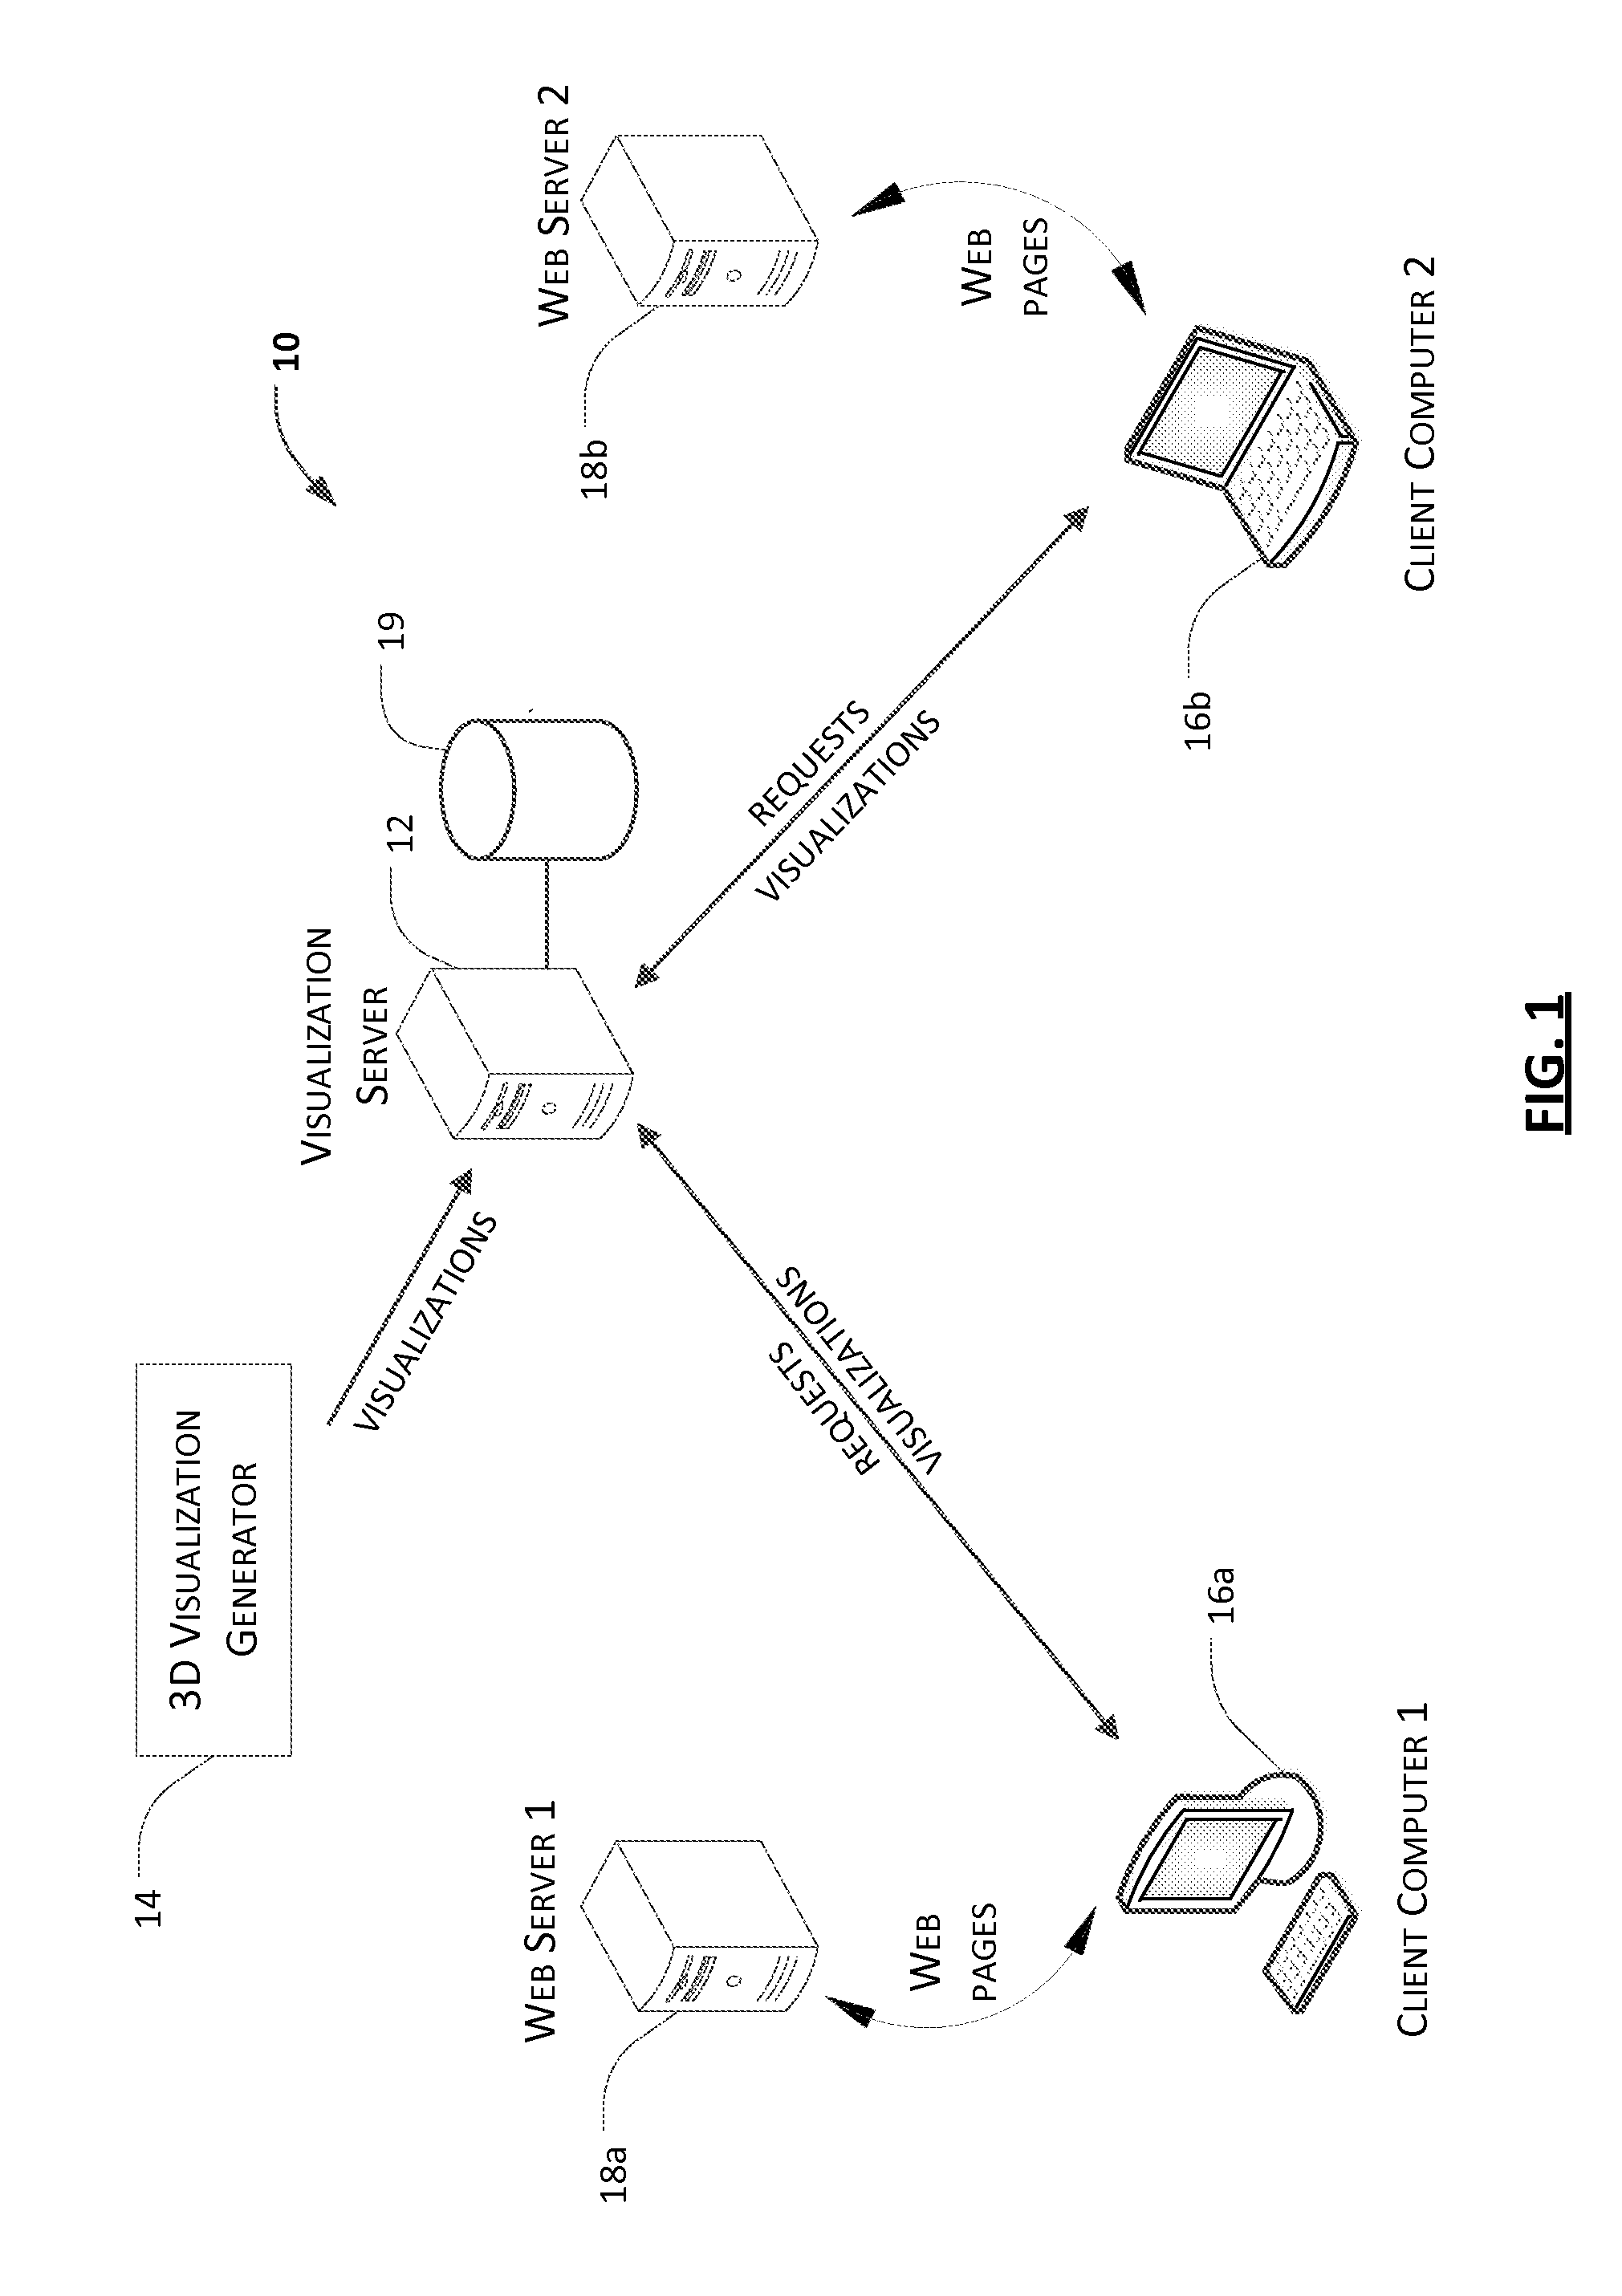 Systems and methods for transmitting and rendering 3D visualizations over a network